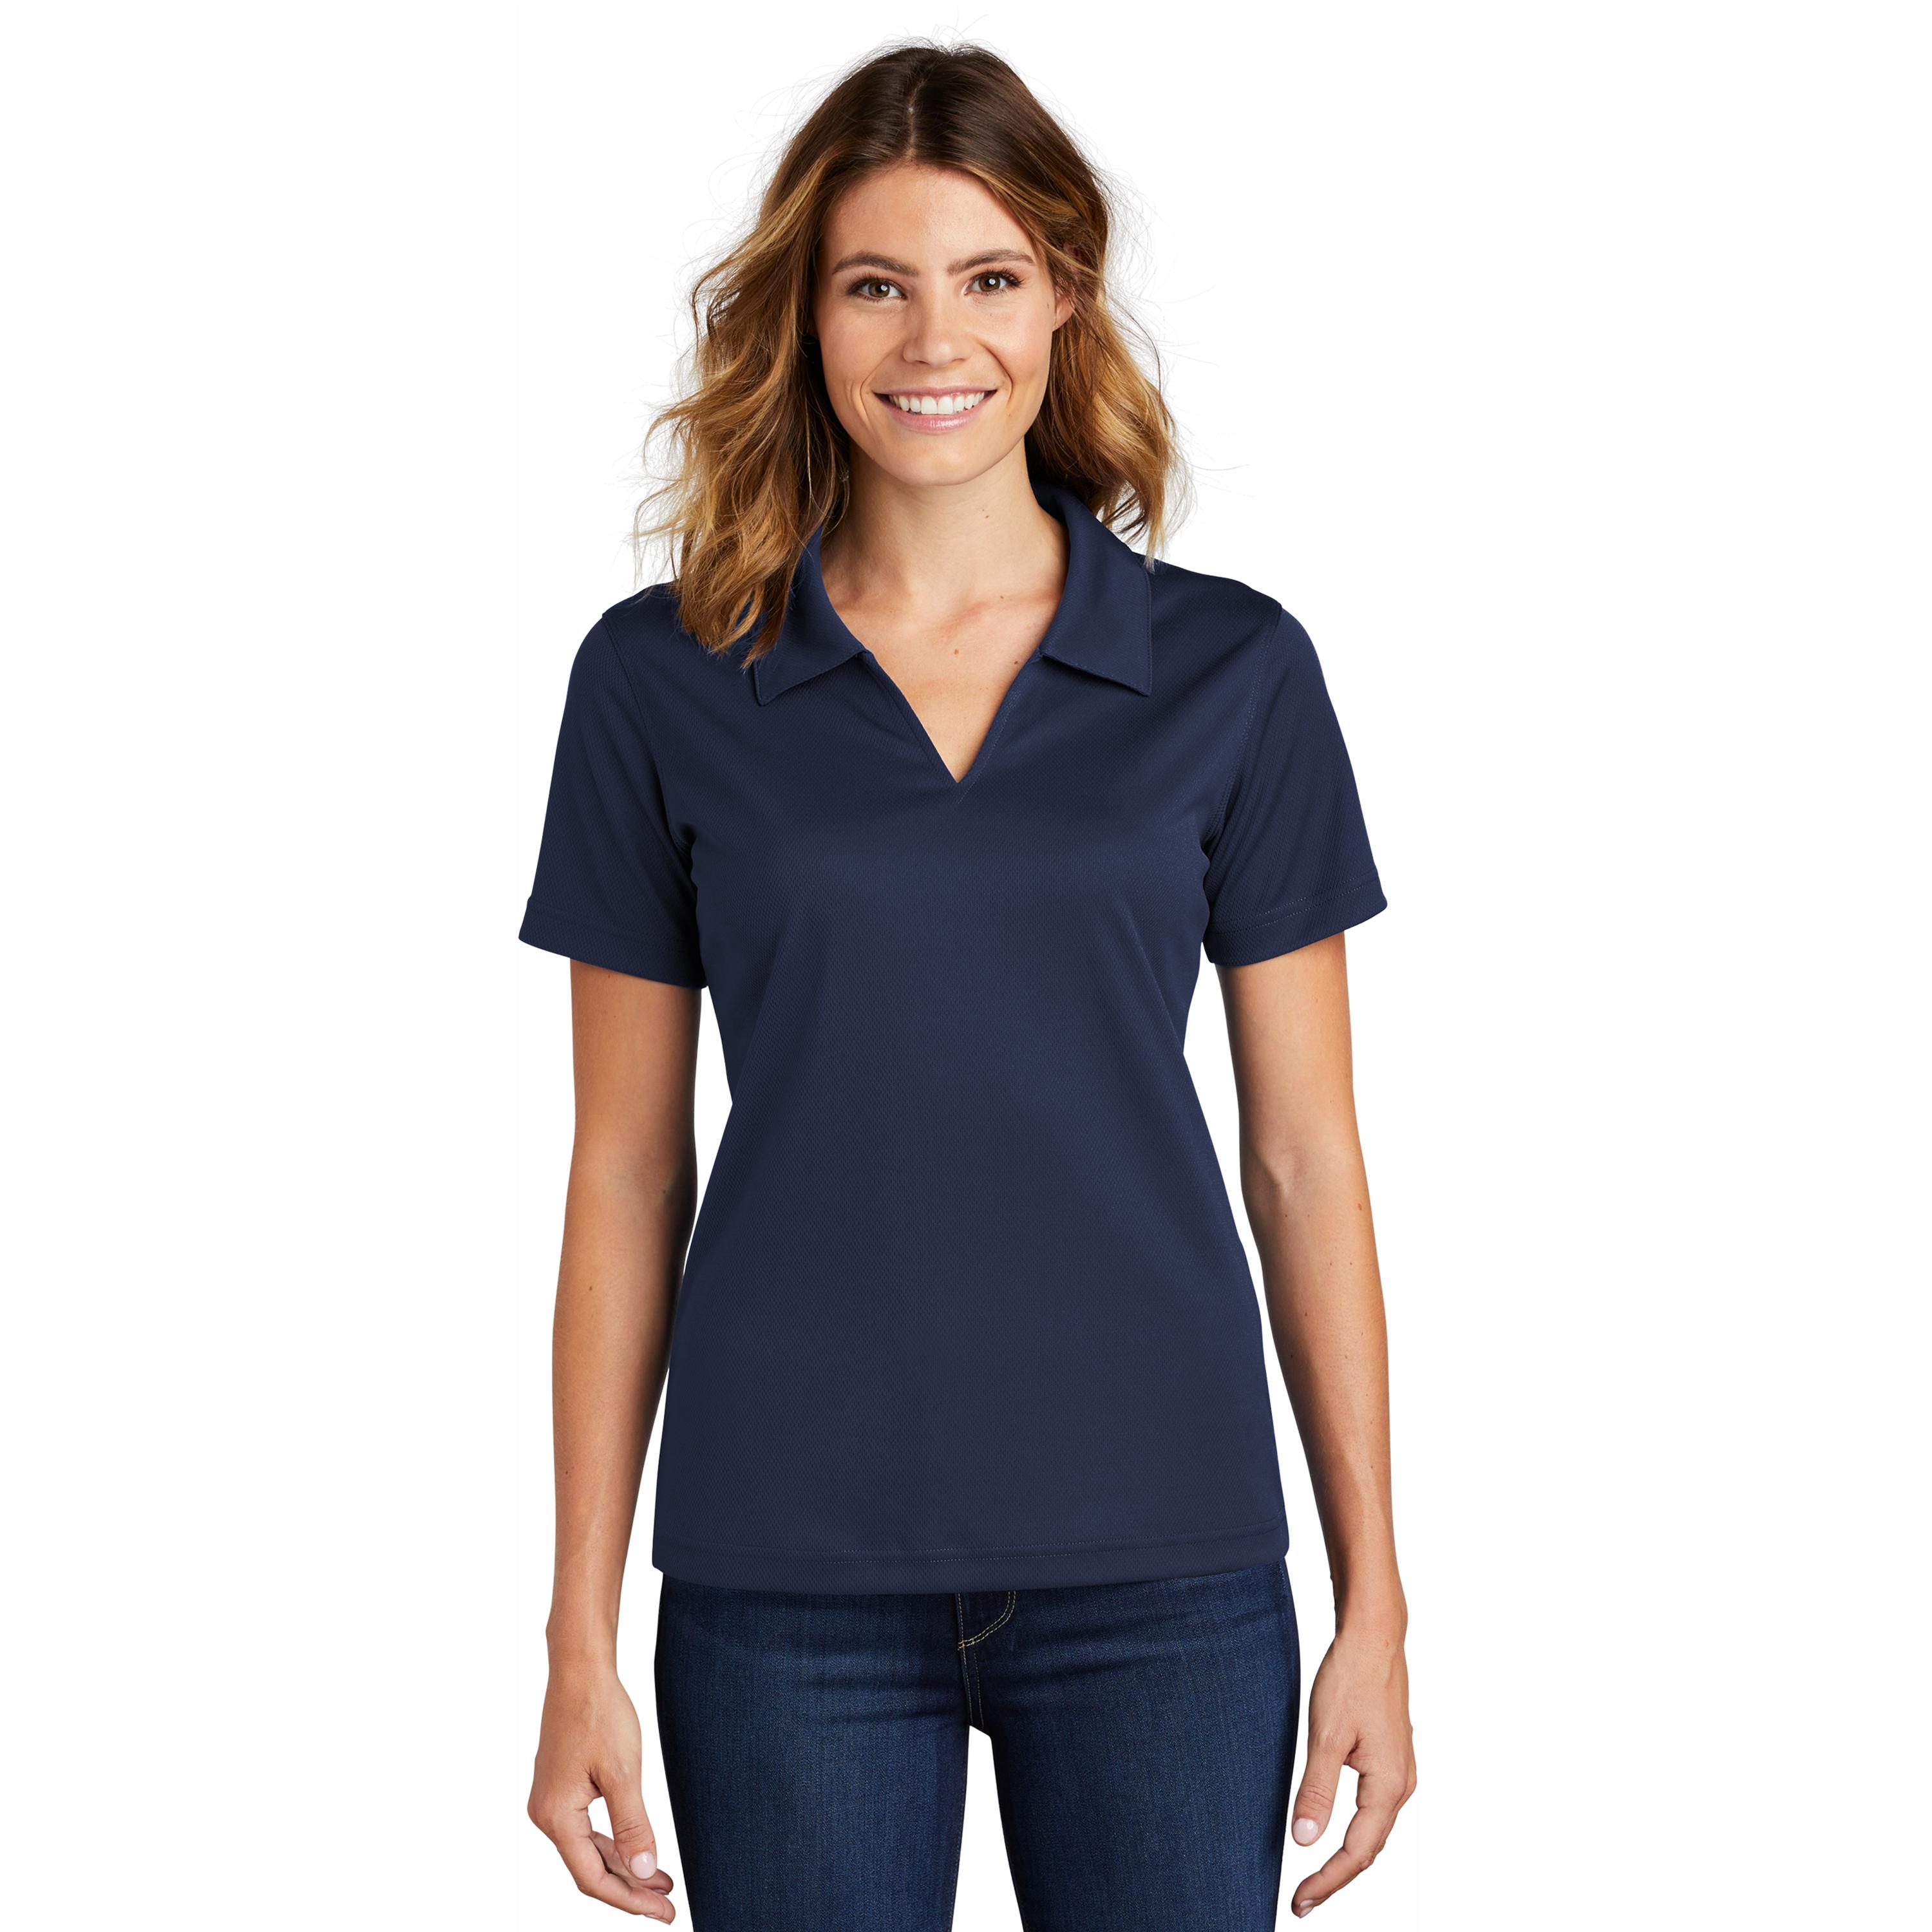 Sport-Tek K467 Dri-Mesh Polo with Tipped Collar and Piping